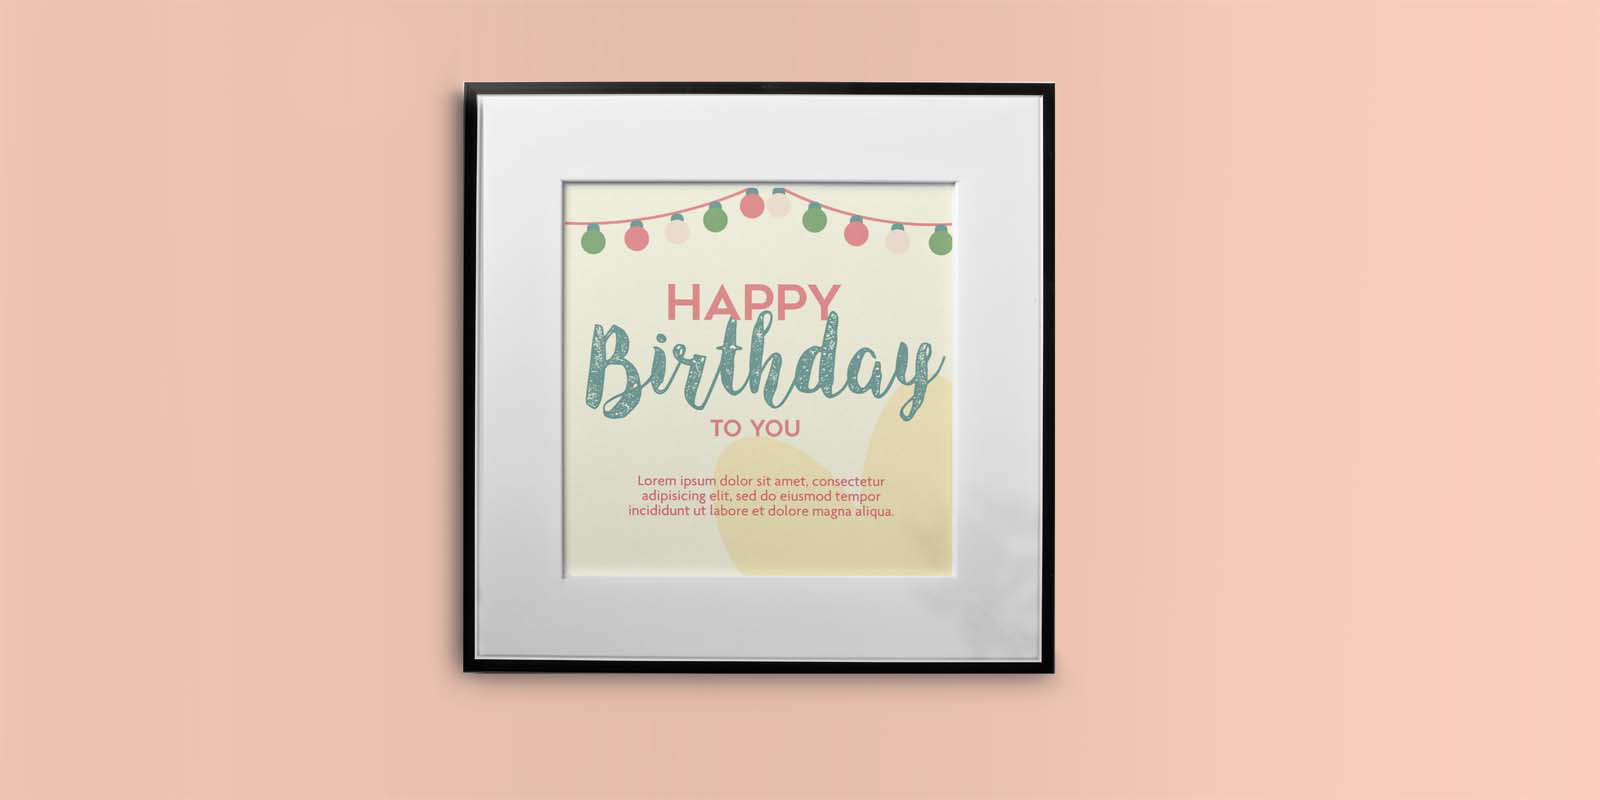 Birthday prints in Toowoomba - Print with Pagerr